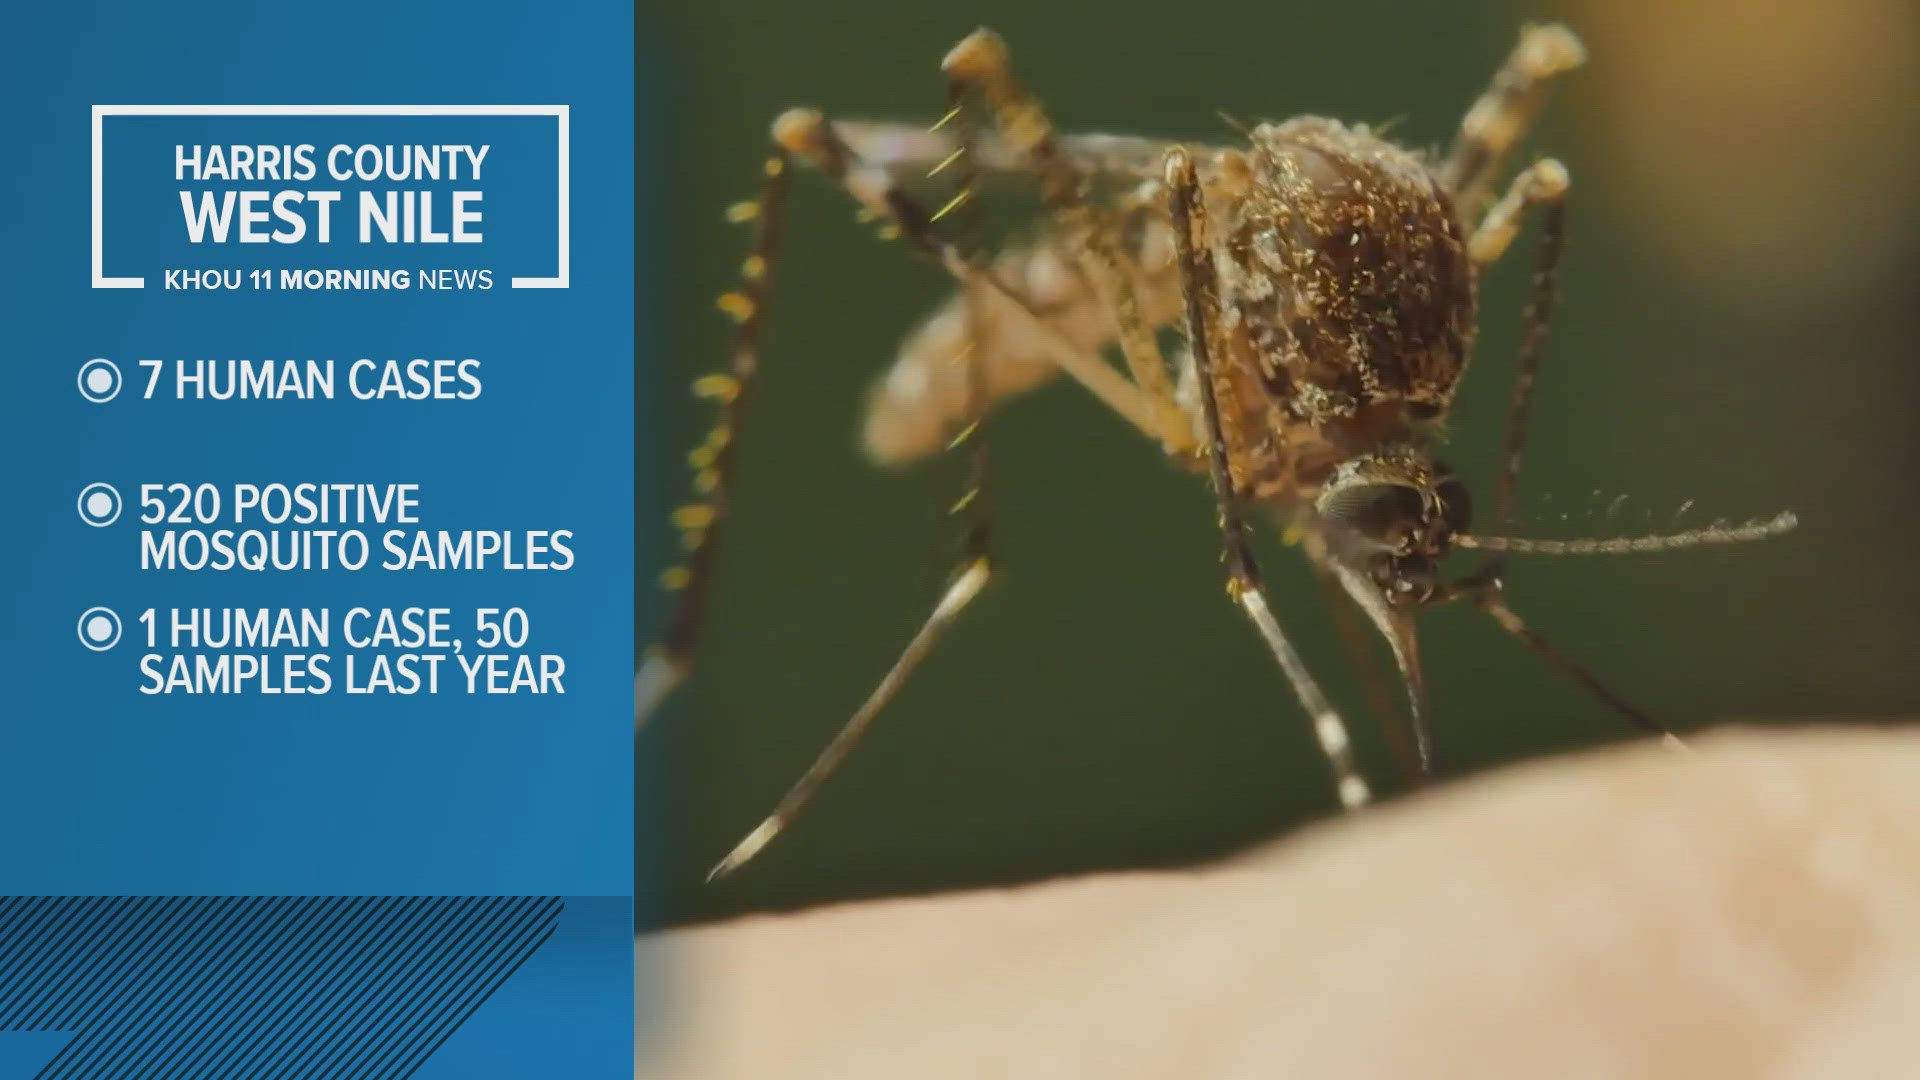 Harris County Public Health is warning residents about a "significant increase" in West Nile activity with positive samples in 168 out of 268 areas countywide.